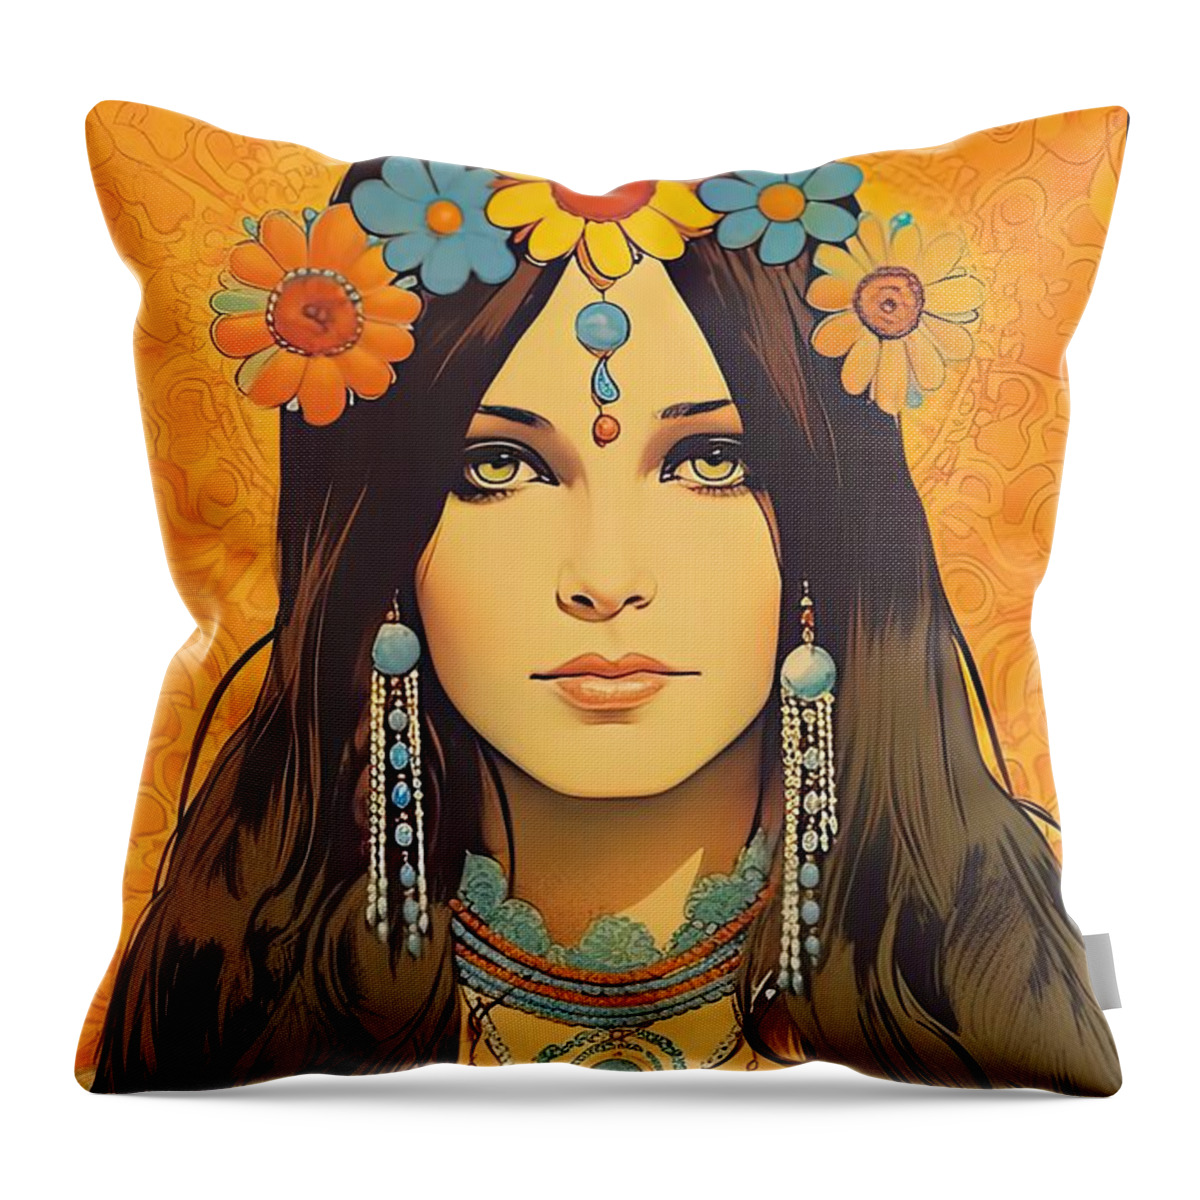 Seventies Throw Pillow featuring the painting Hippie Chix VIII by Mindy Sommers